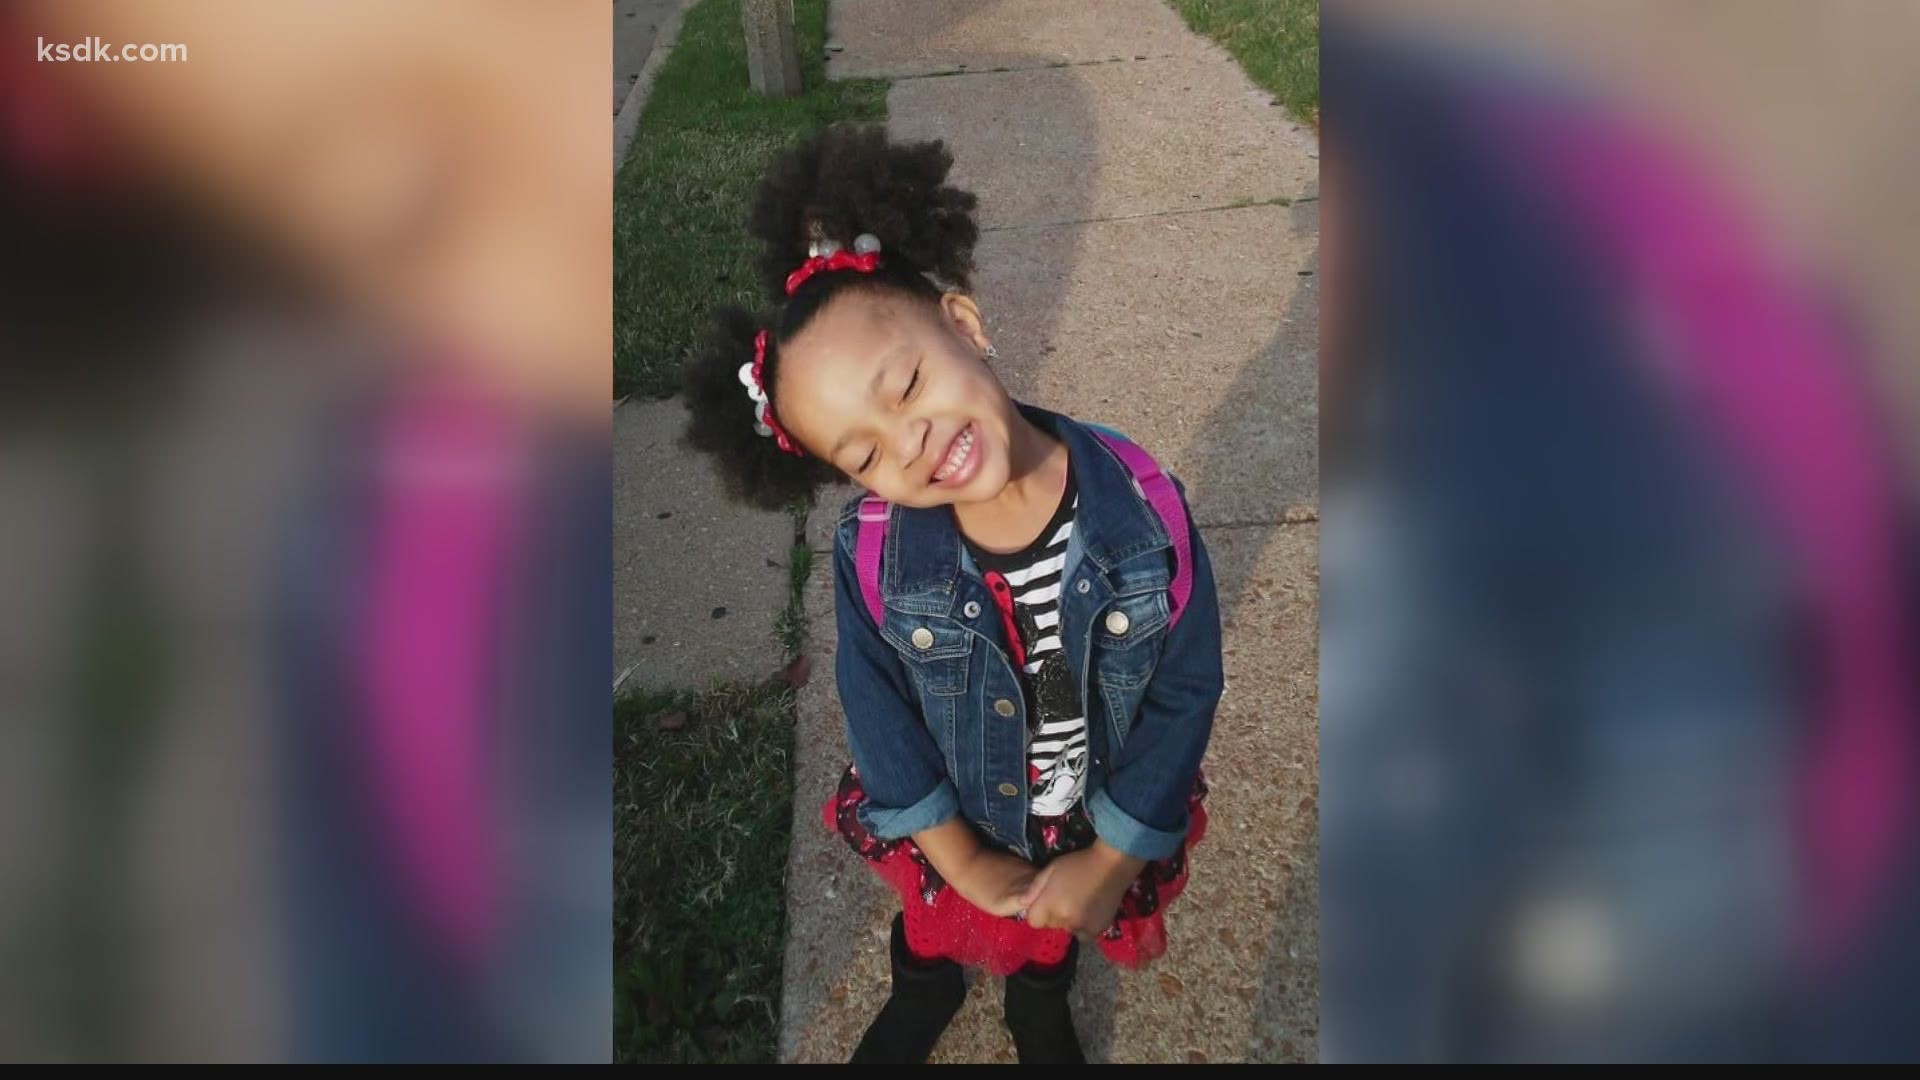 Dmyah Fleming's father was about to surprise her with a new PlayStation when the two were gunned down outside his house, family says